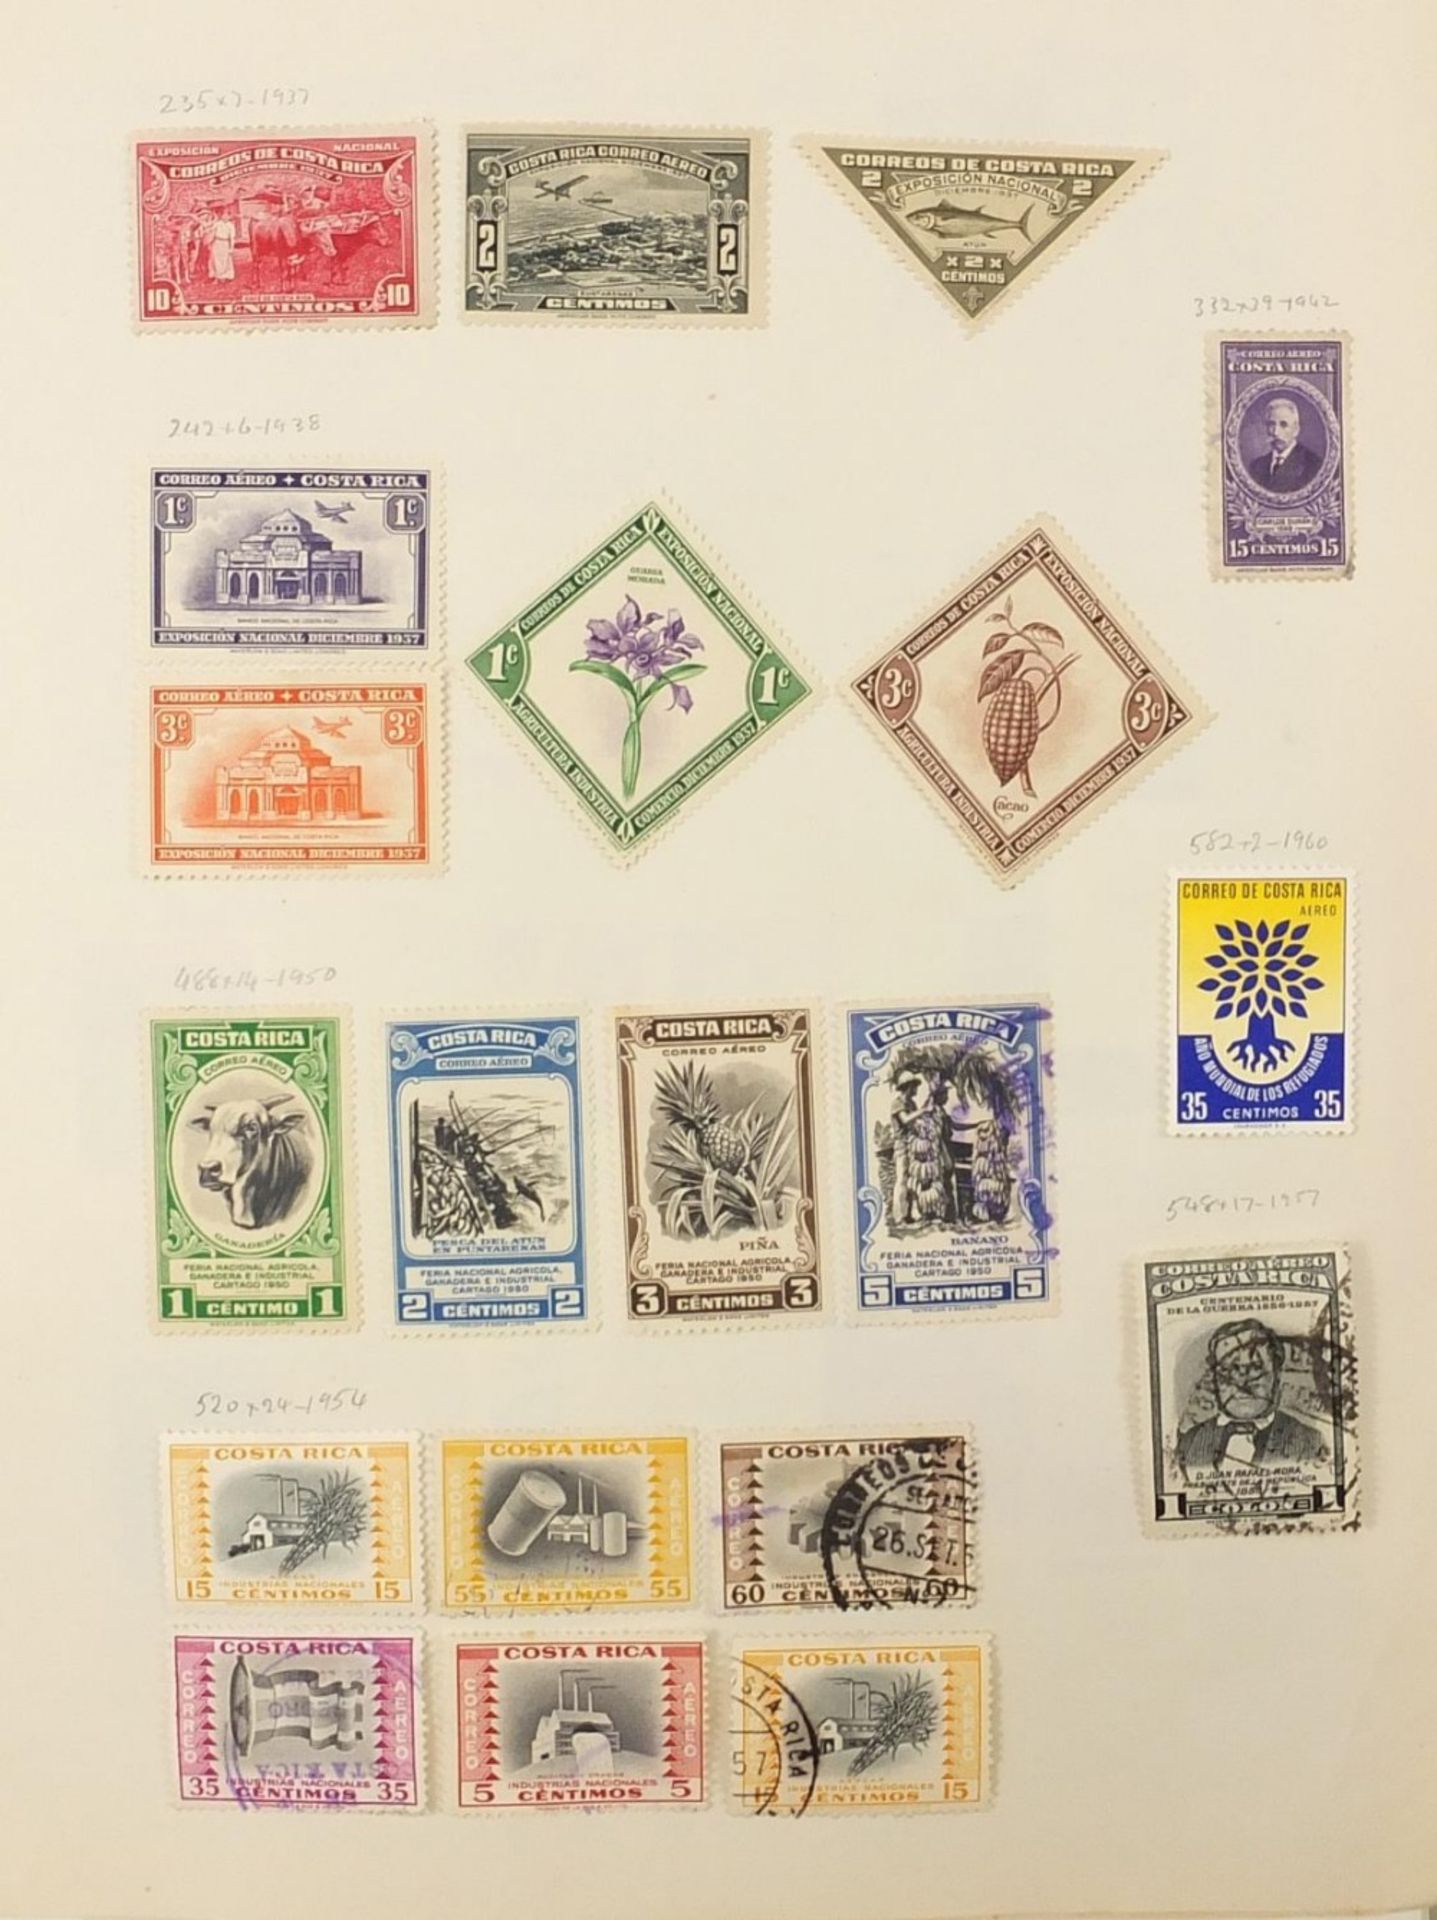 Extensive collection of antique and later world stamps arranged in albums including Brazil, - Image 15 of 52